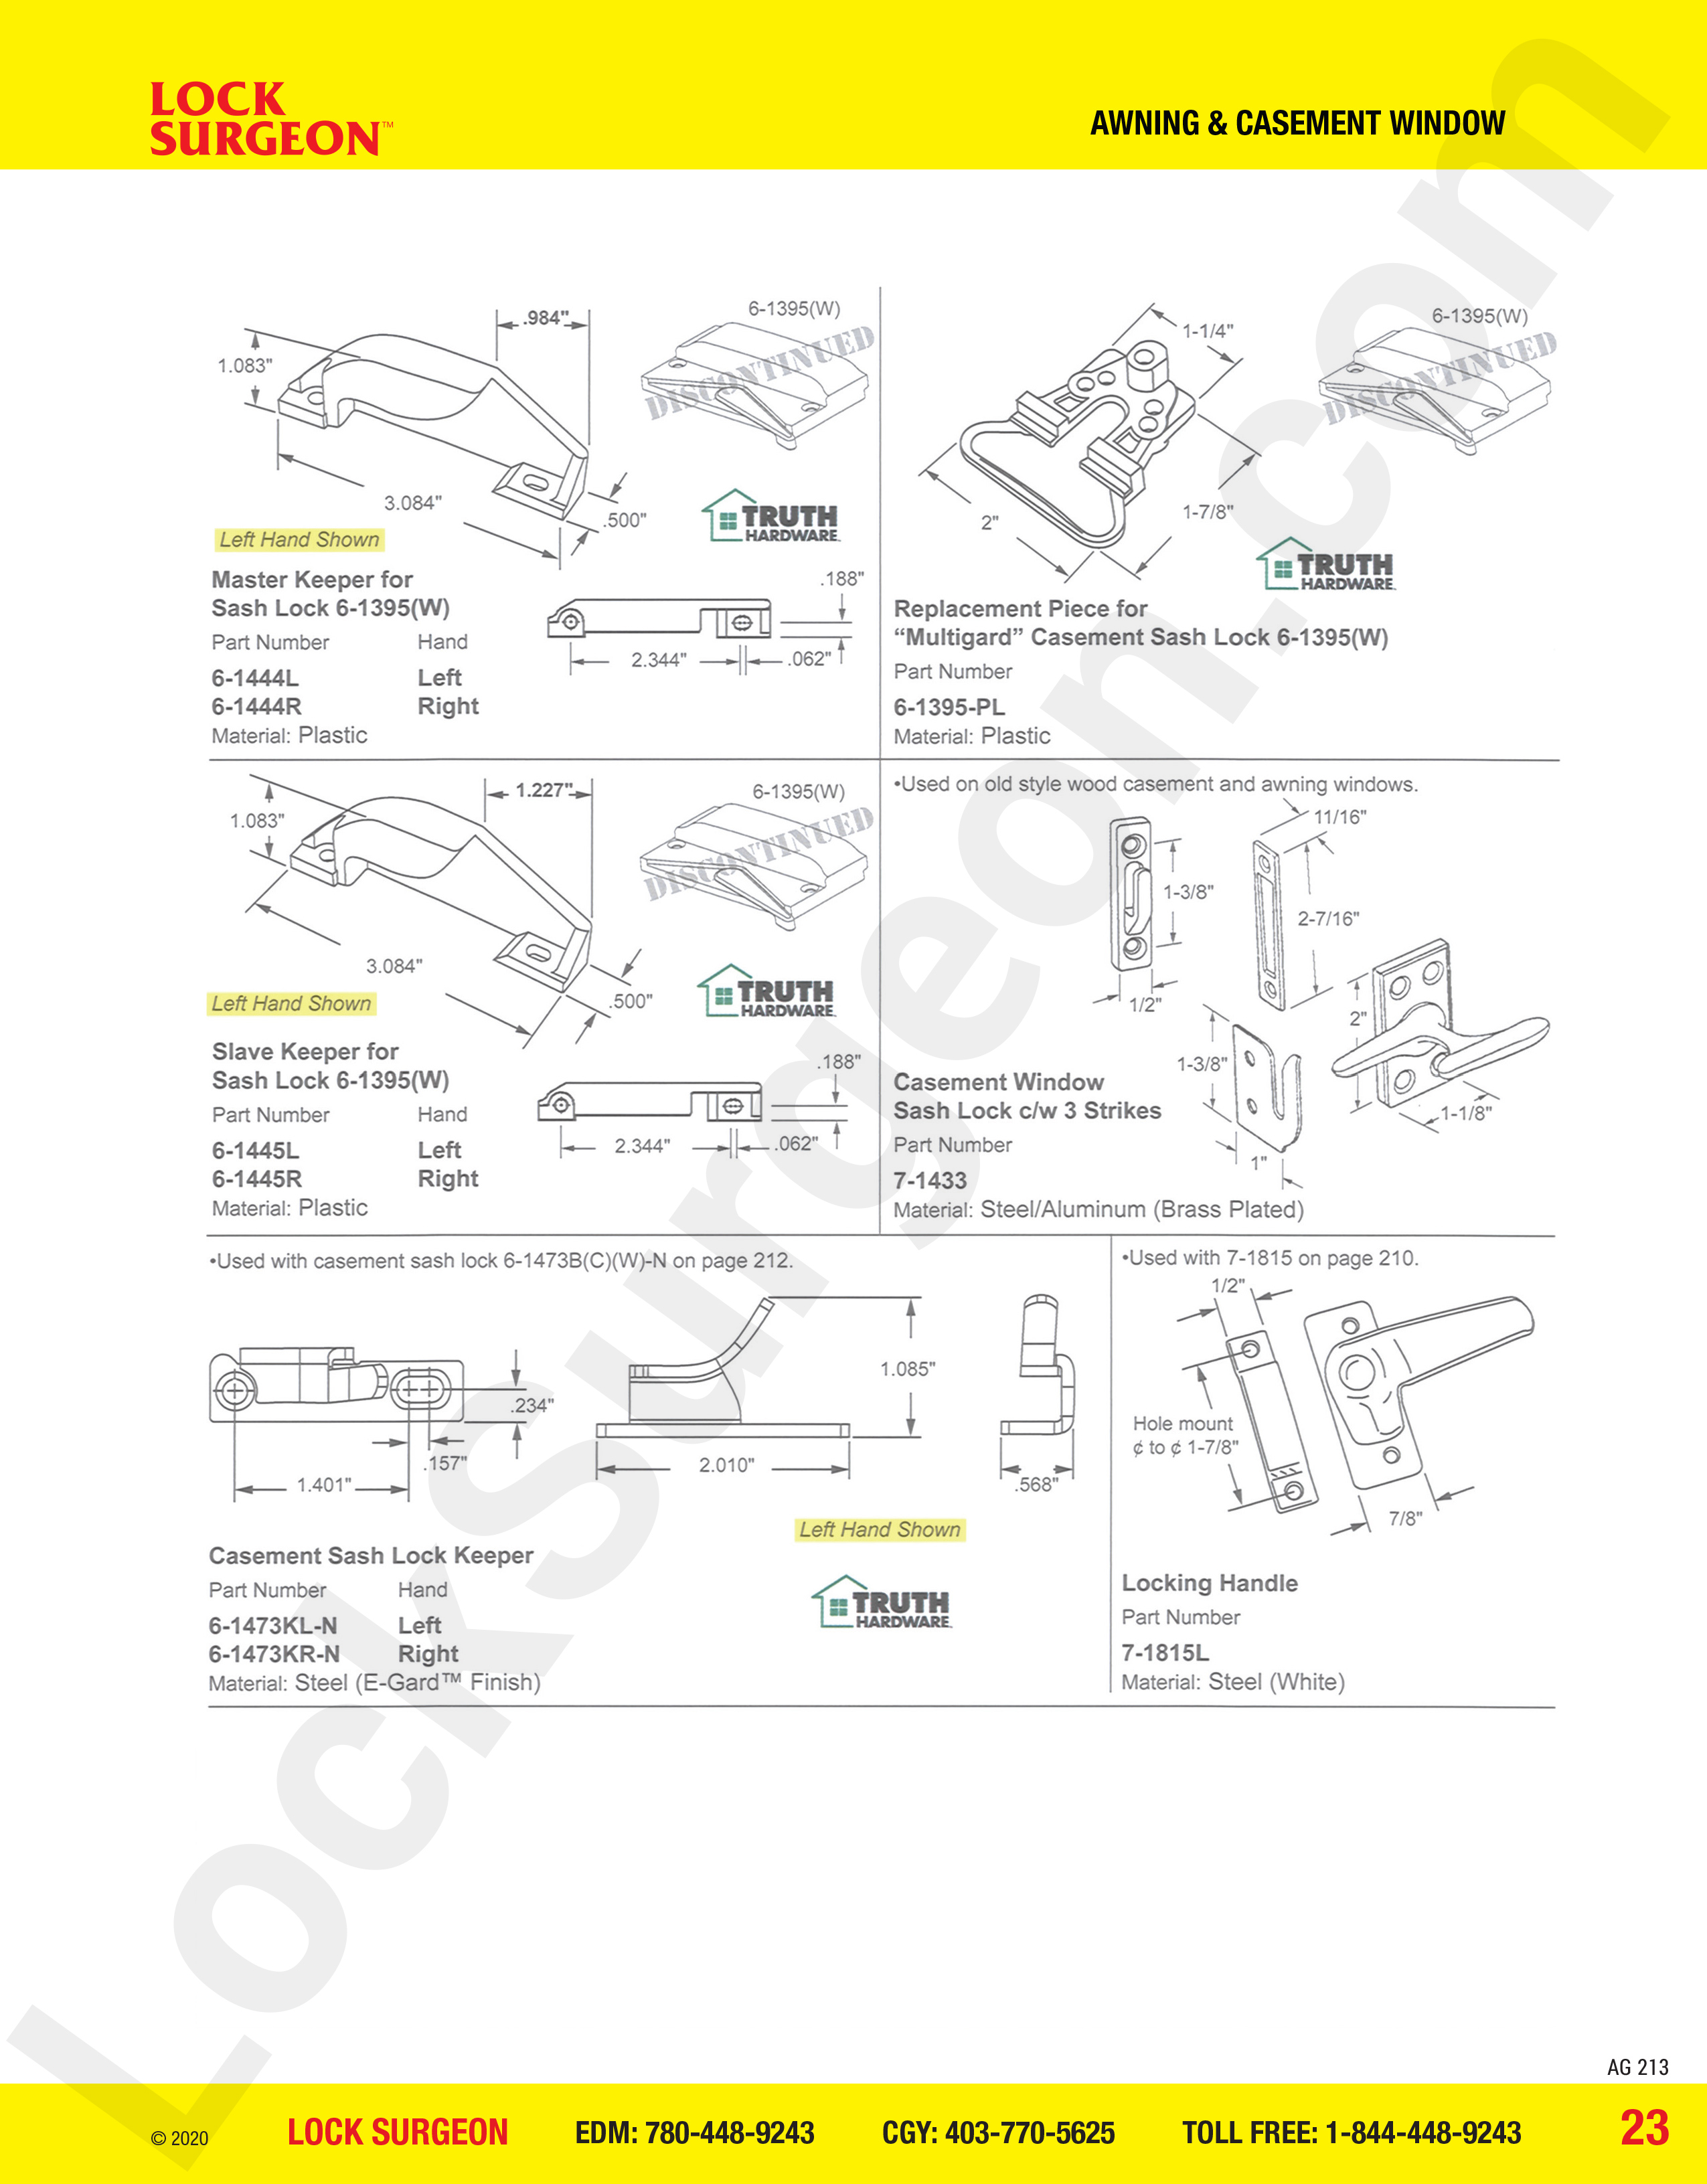 Acheson mobile awning and casement window parts for sash locks